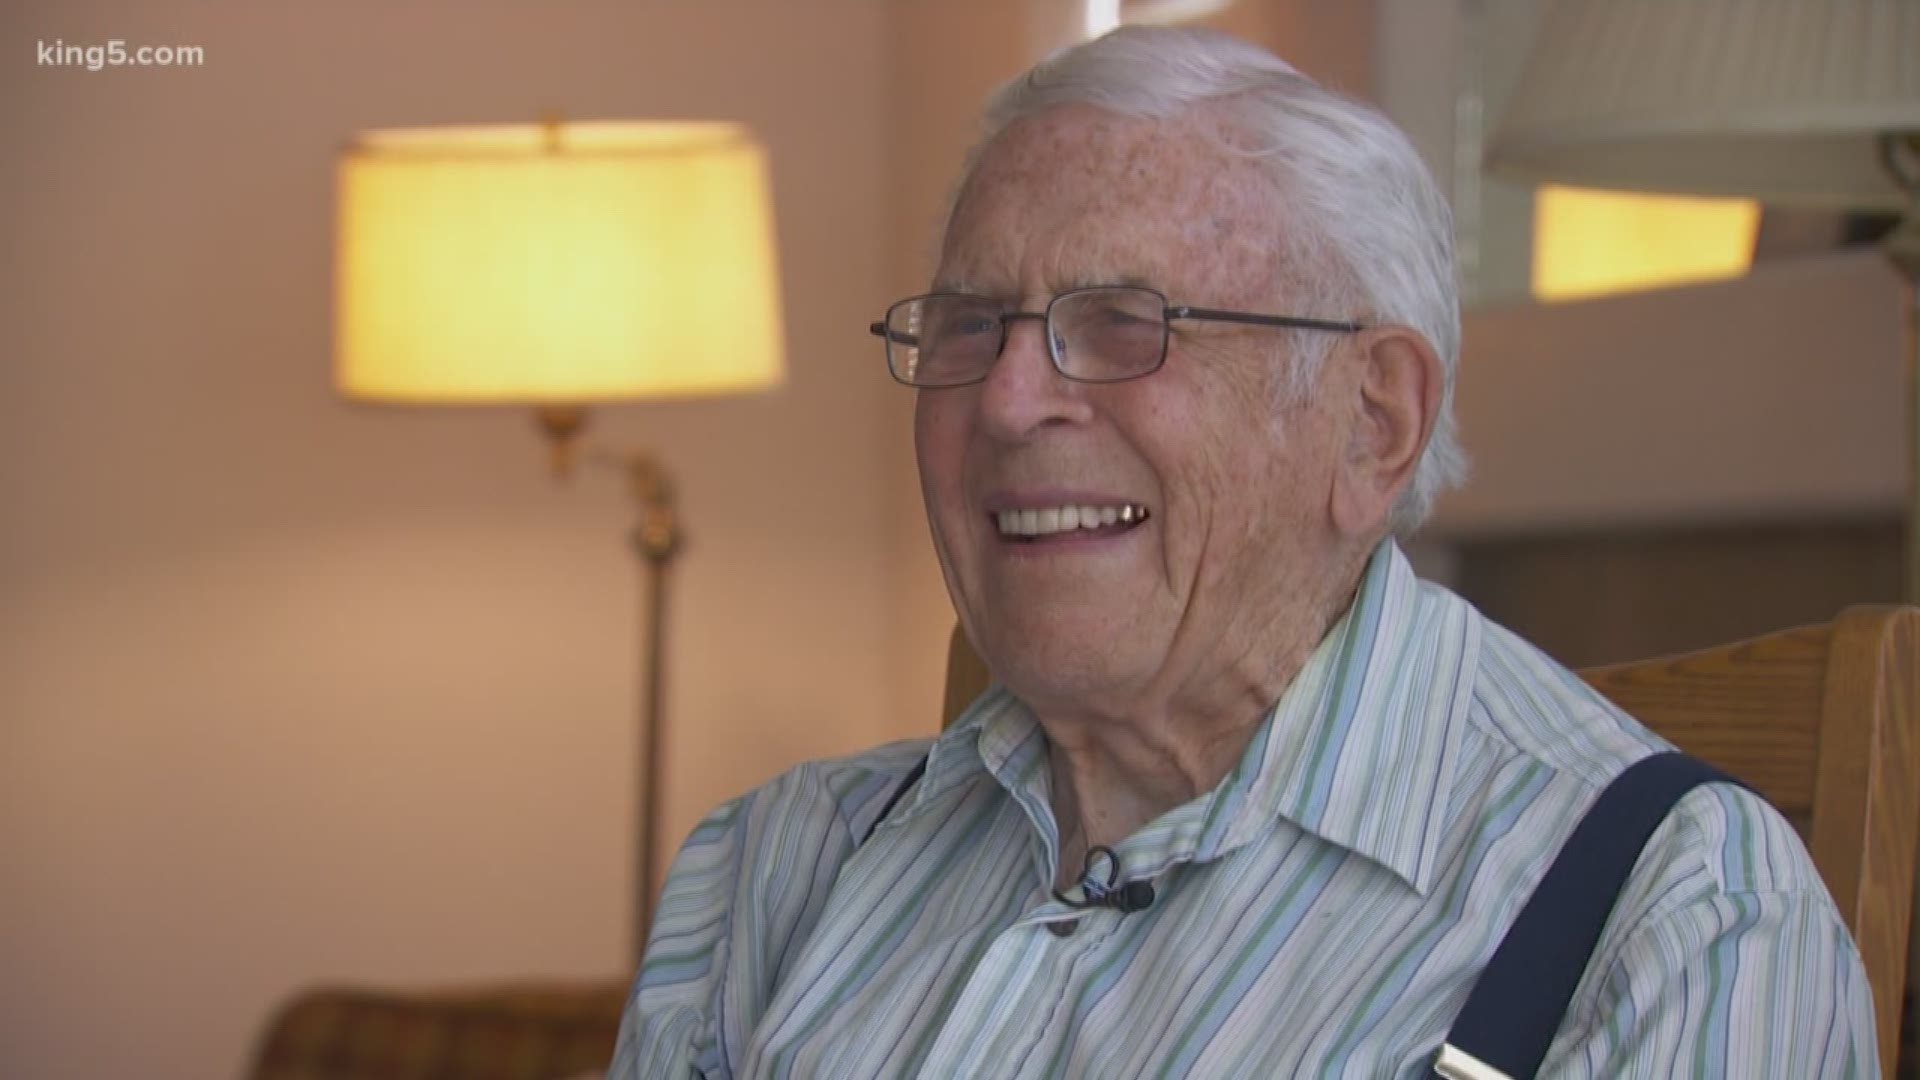 The 92-year-old said volunteering keeps him healthy and helps others.